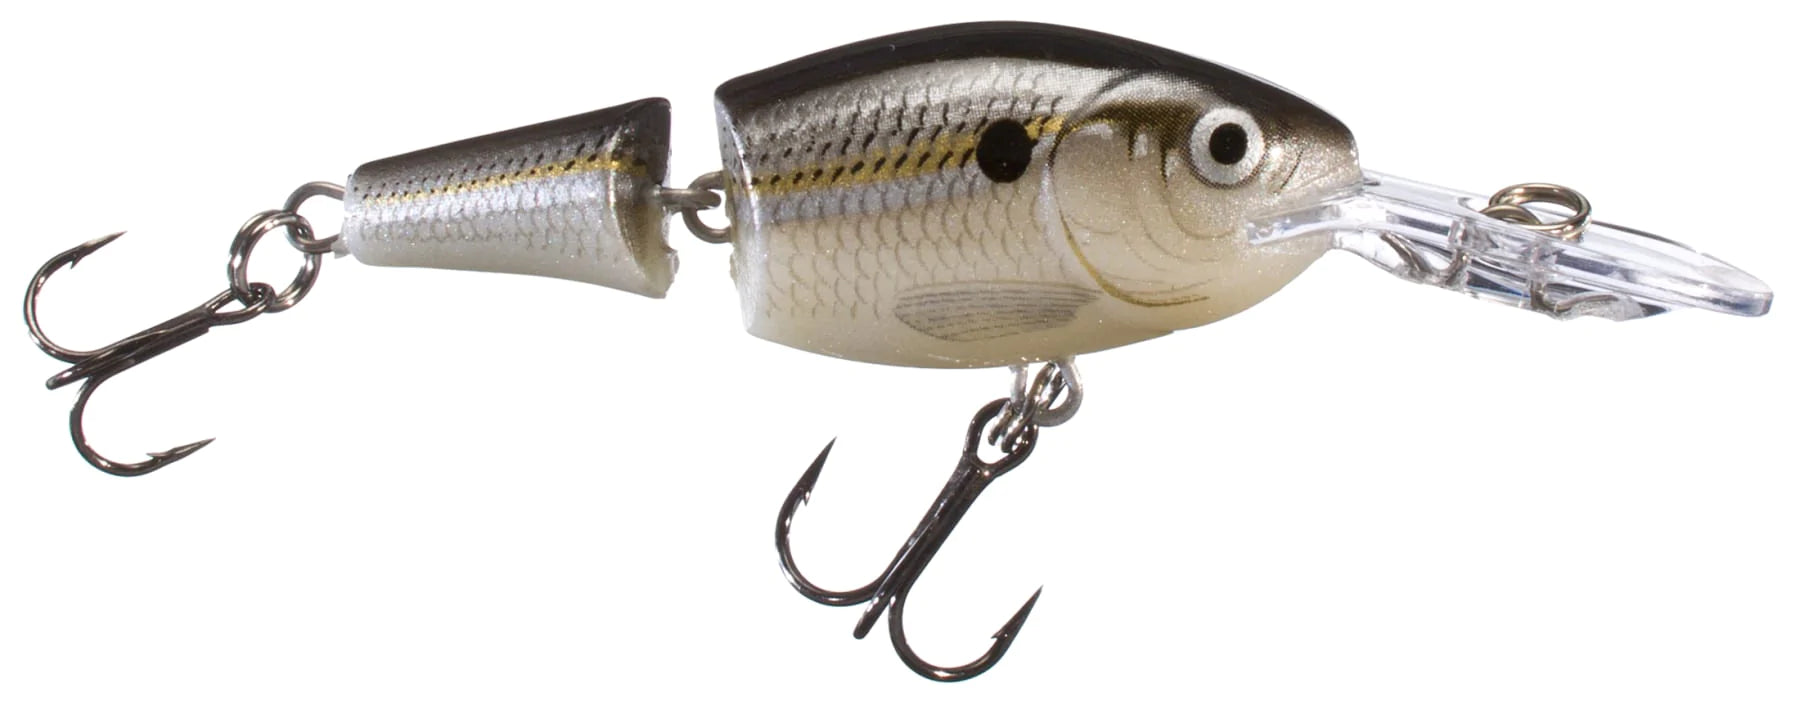 Jointed Shad Rap 04